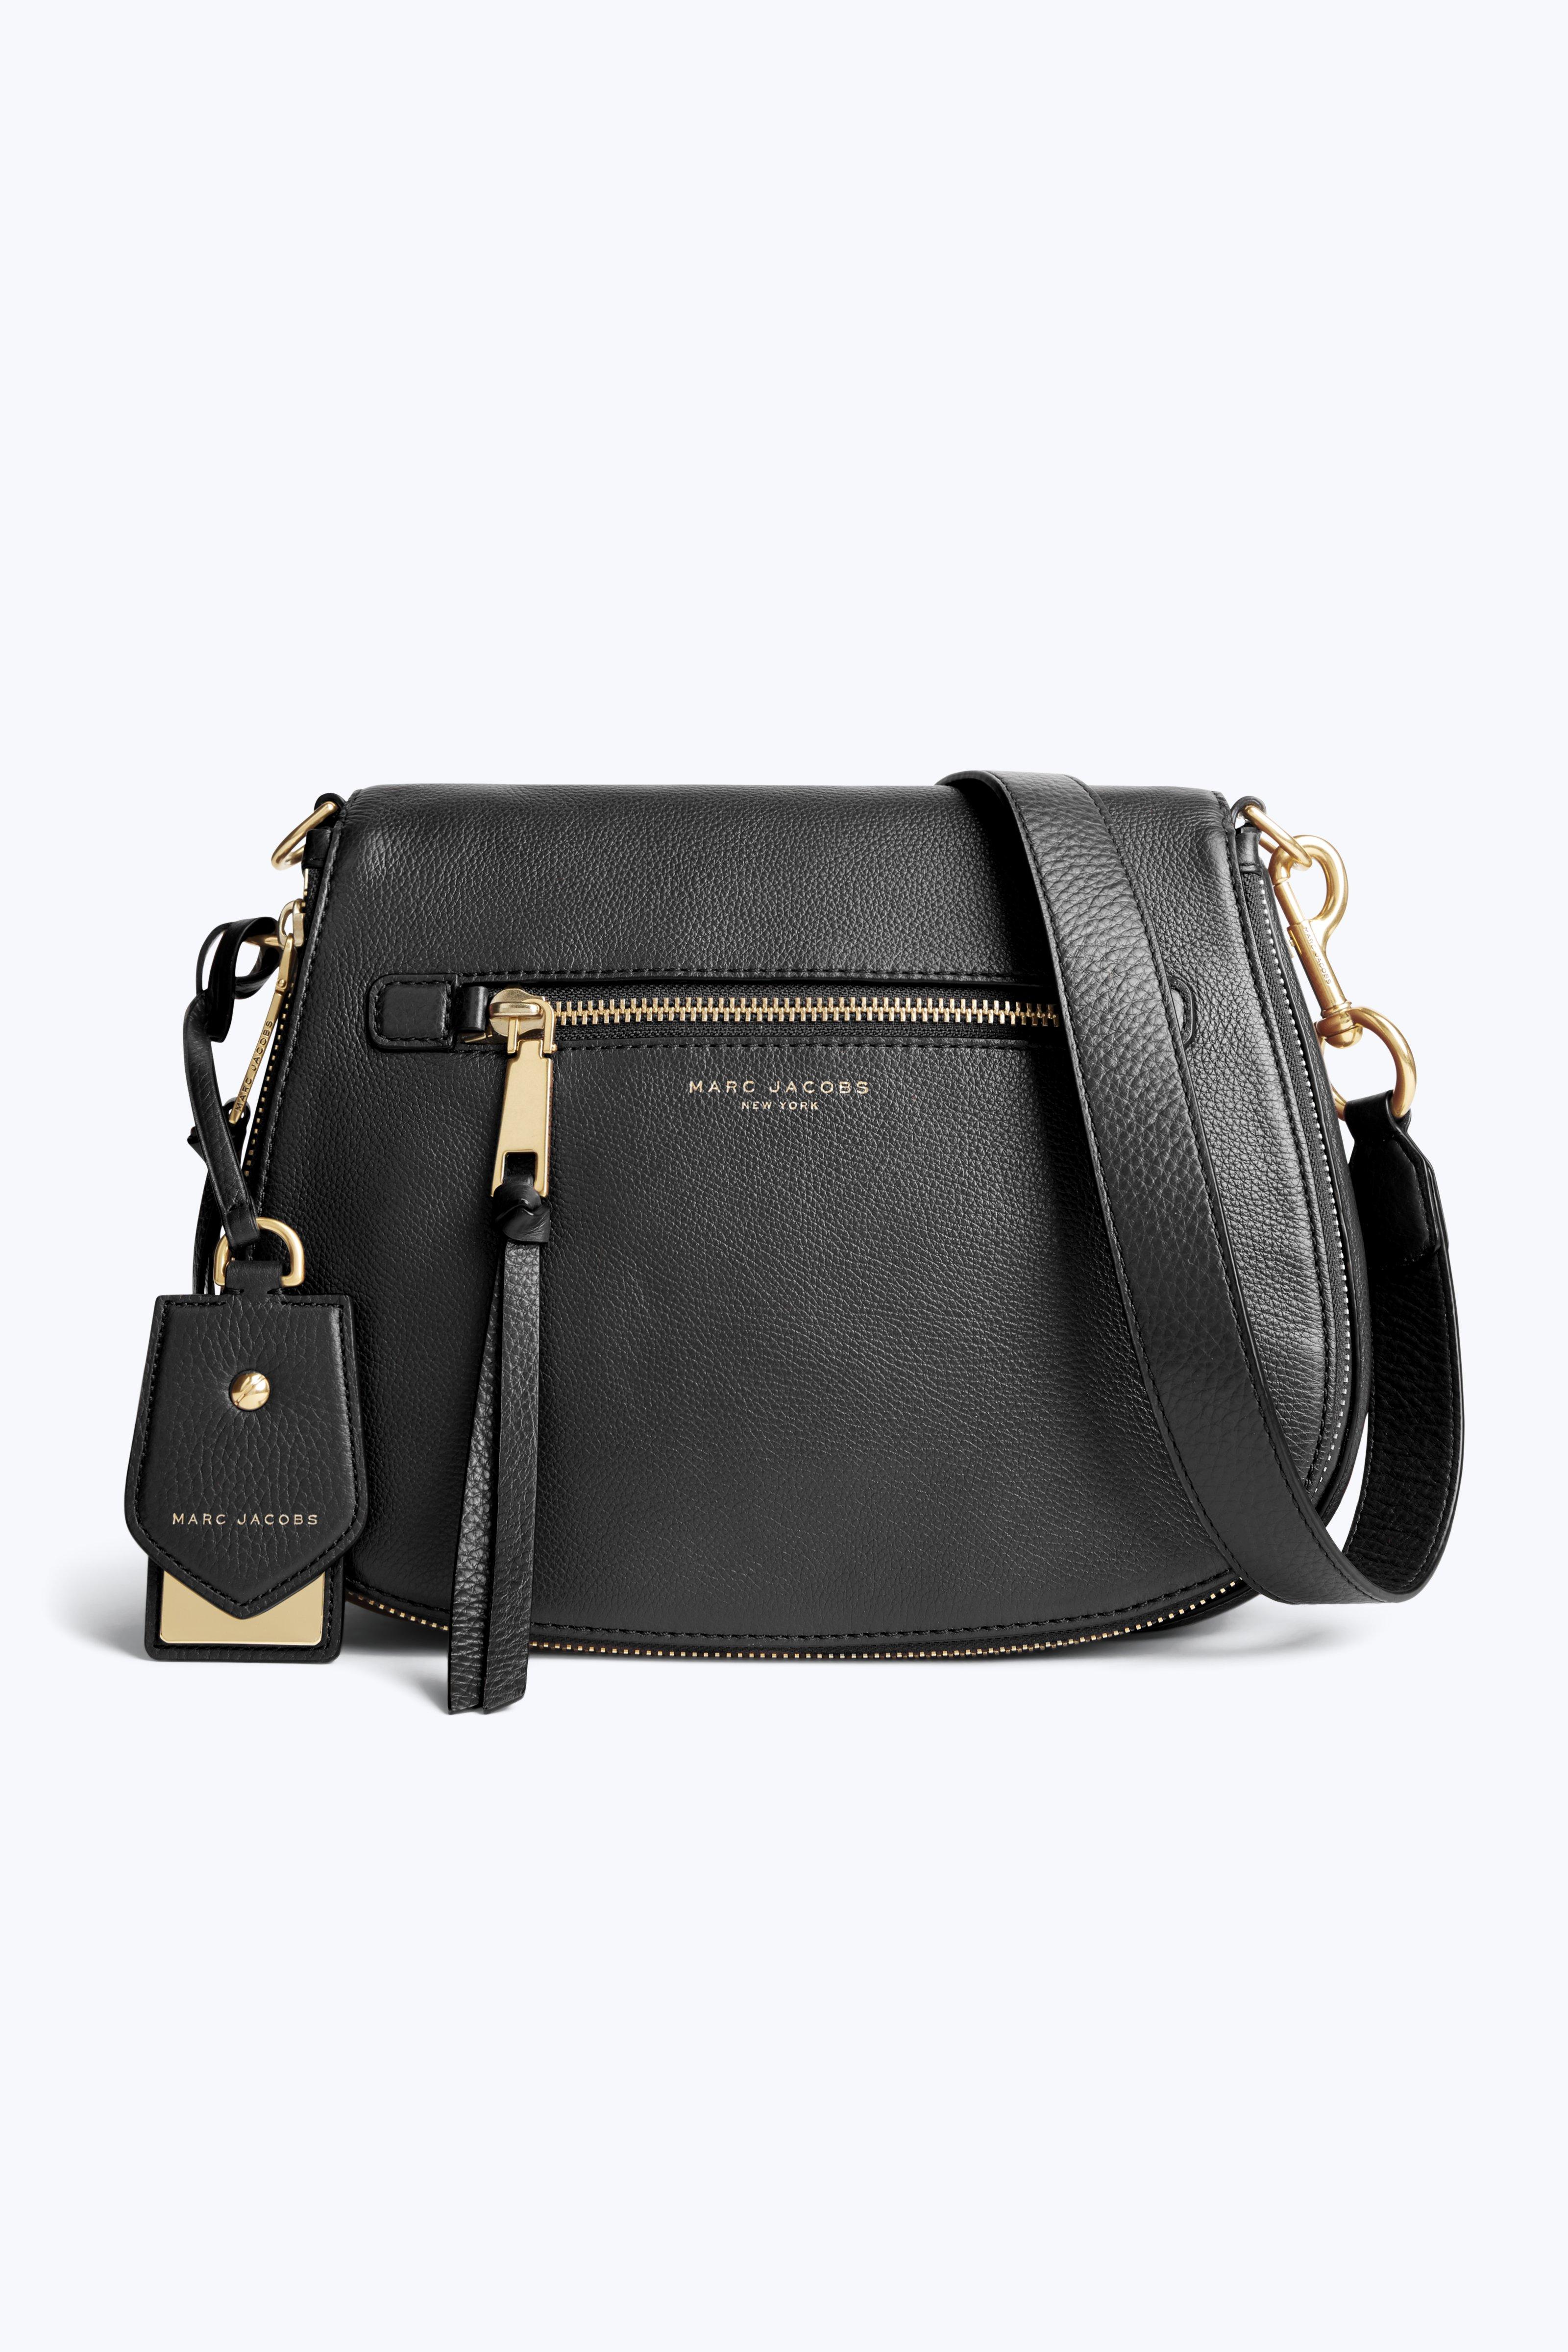 MARC JACOBS Small Recruit Nomad Pebbled Leather Crossbody Bag - Black